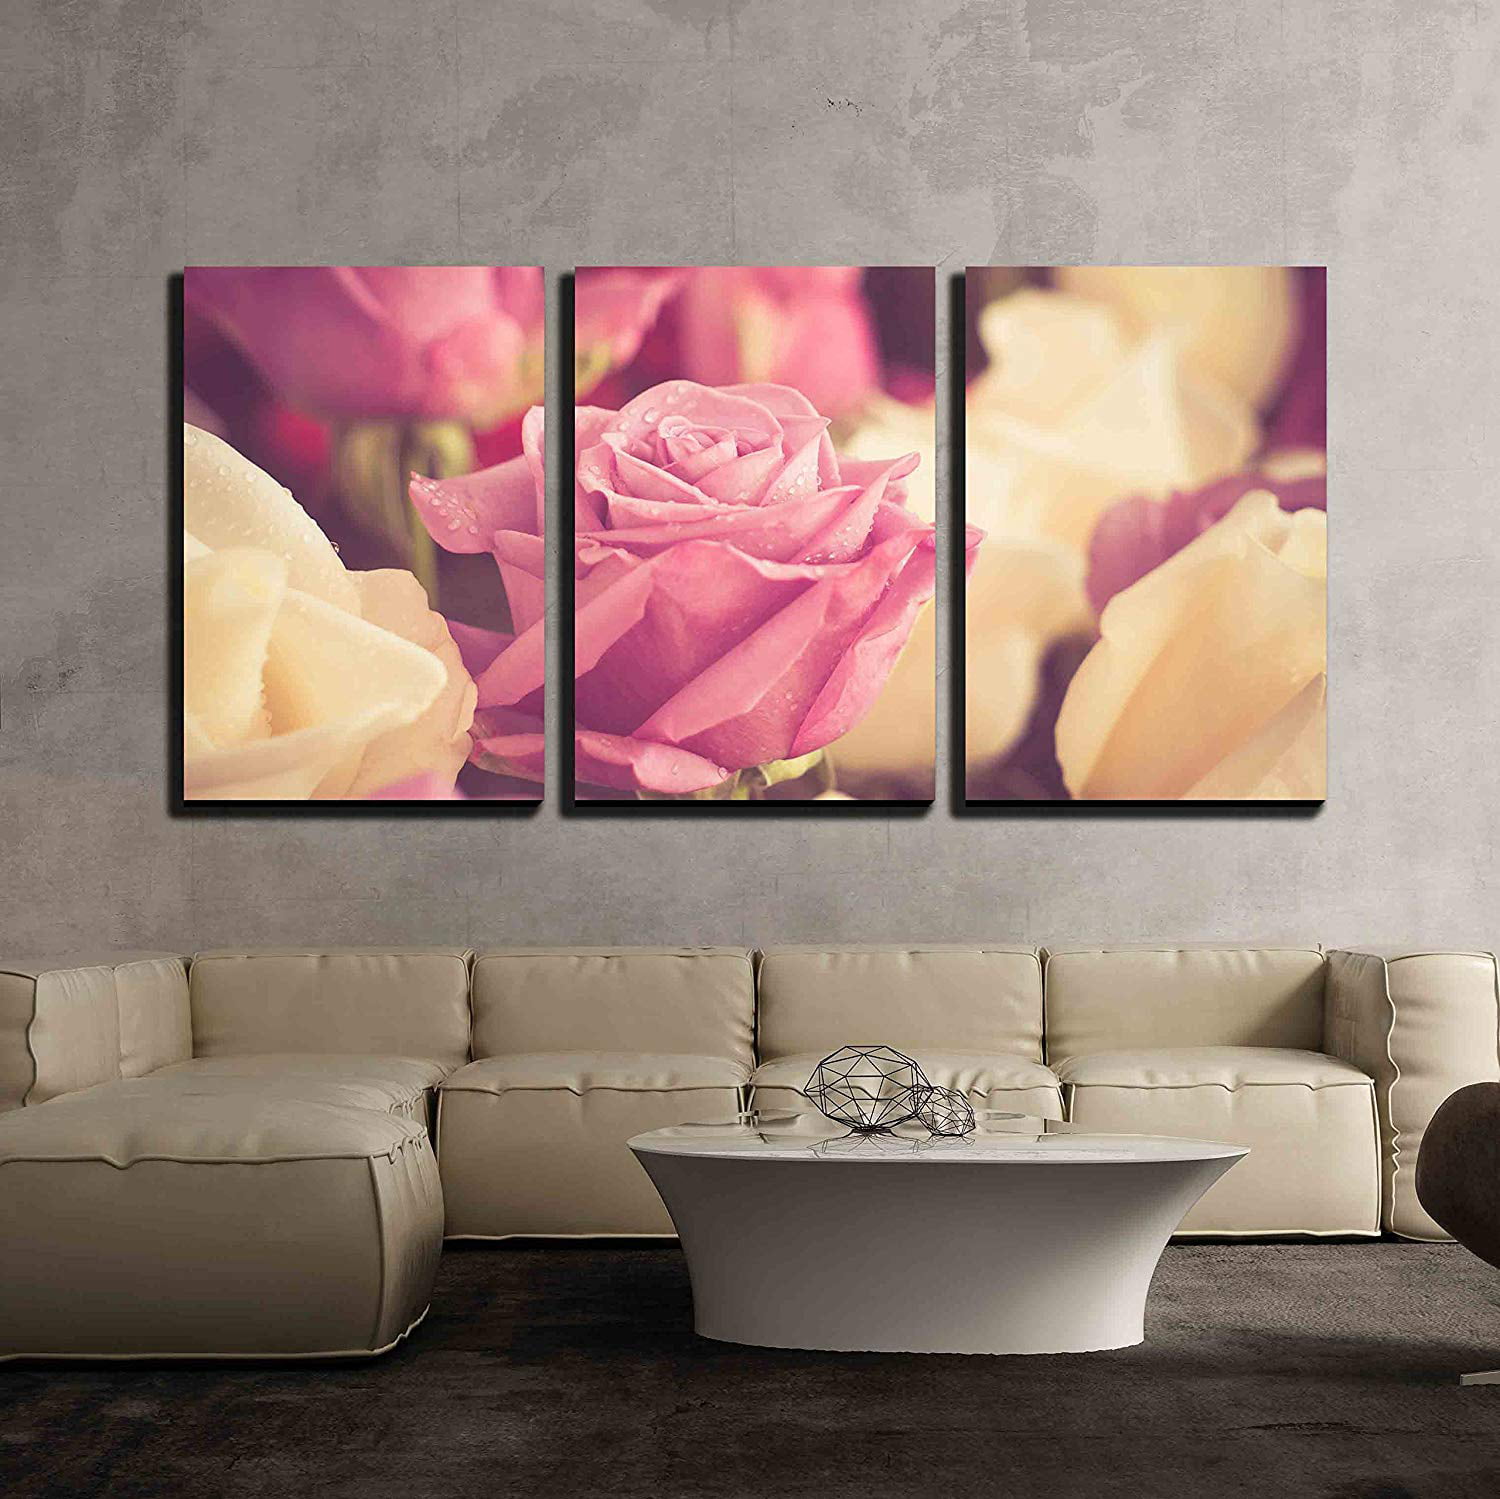 Wall26 3 Piece Canvas Wall Art - Flowers Rose with Filter Effect Retro ...